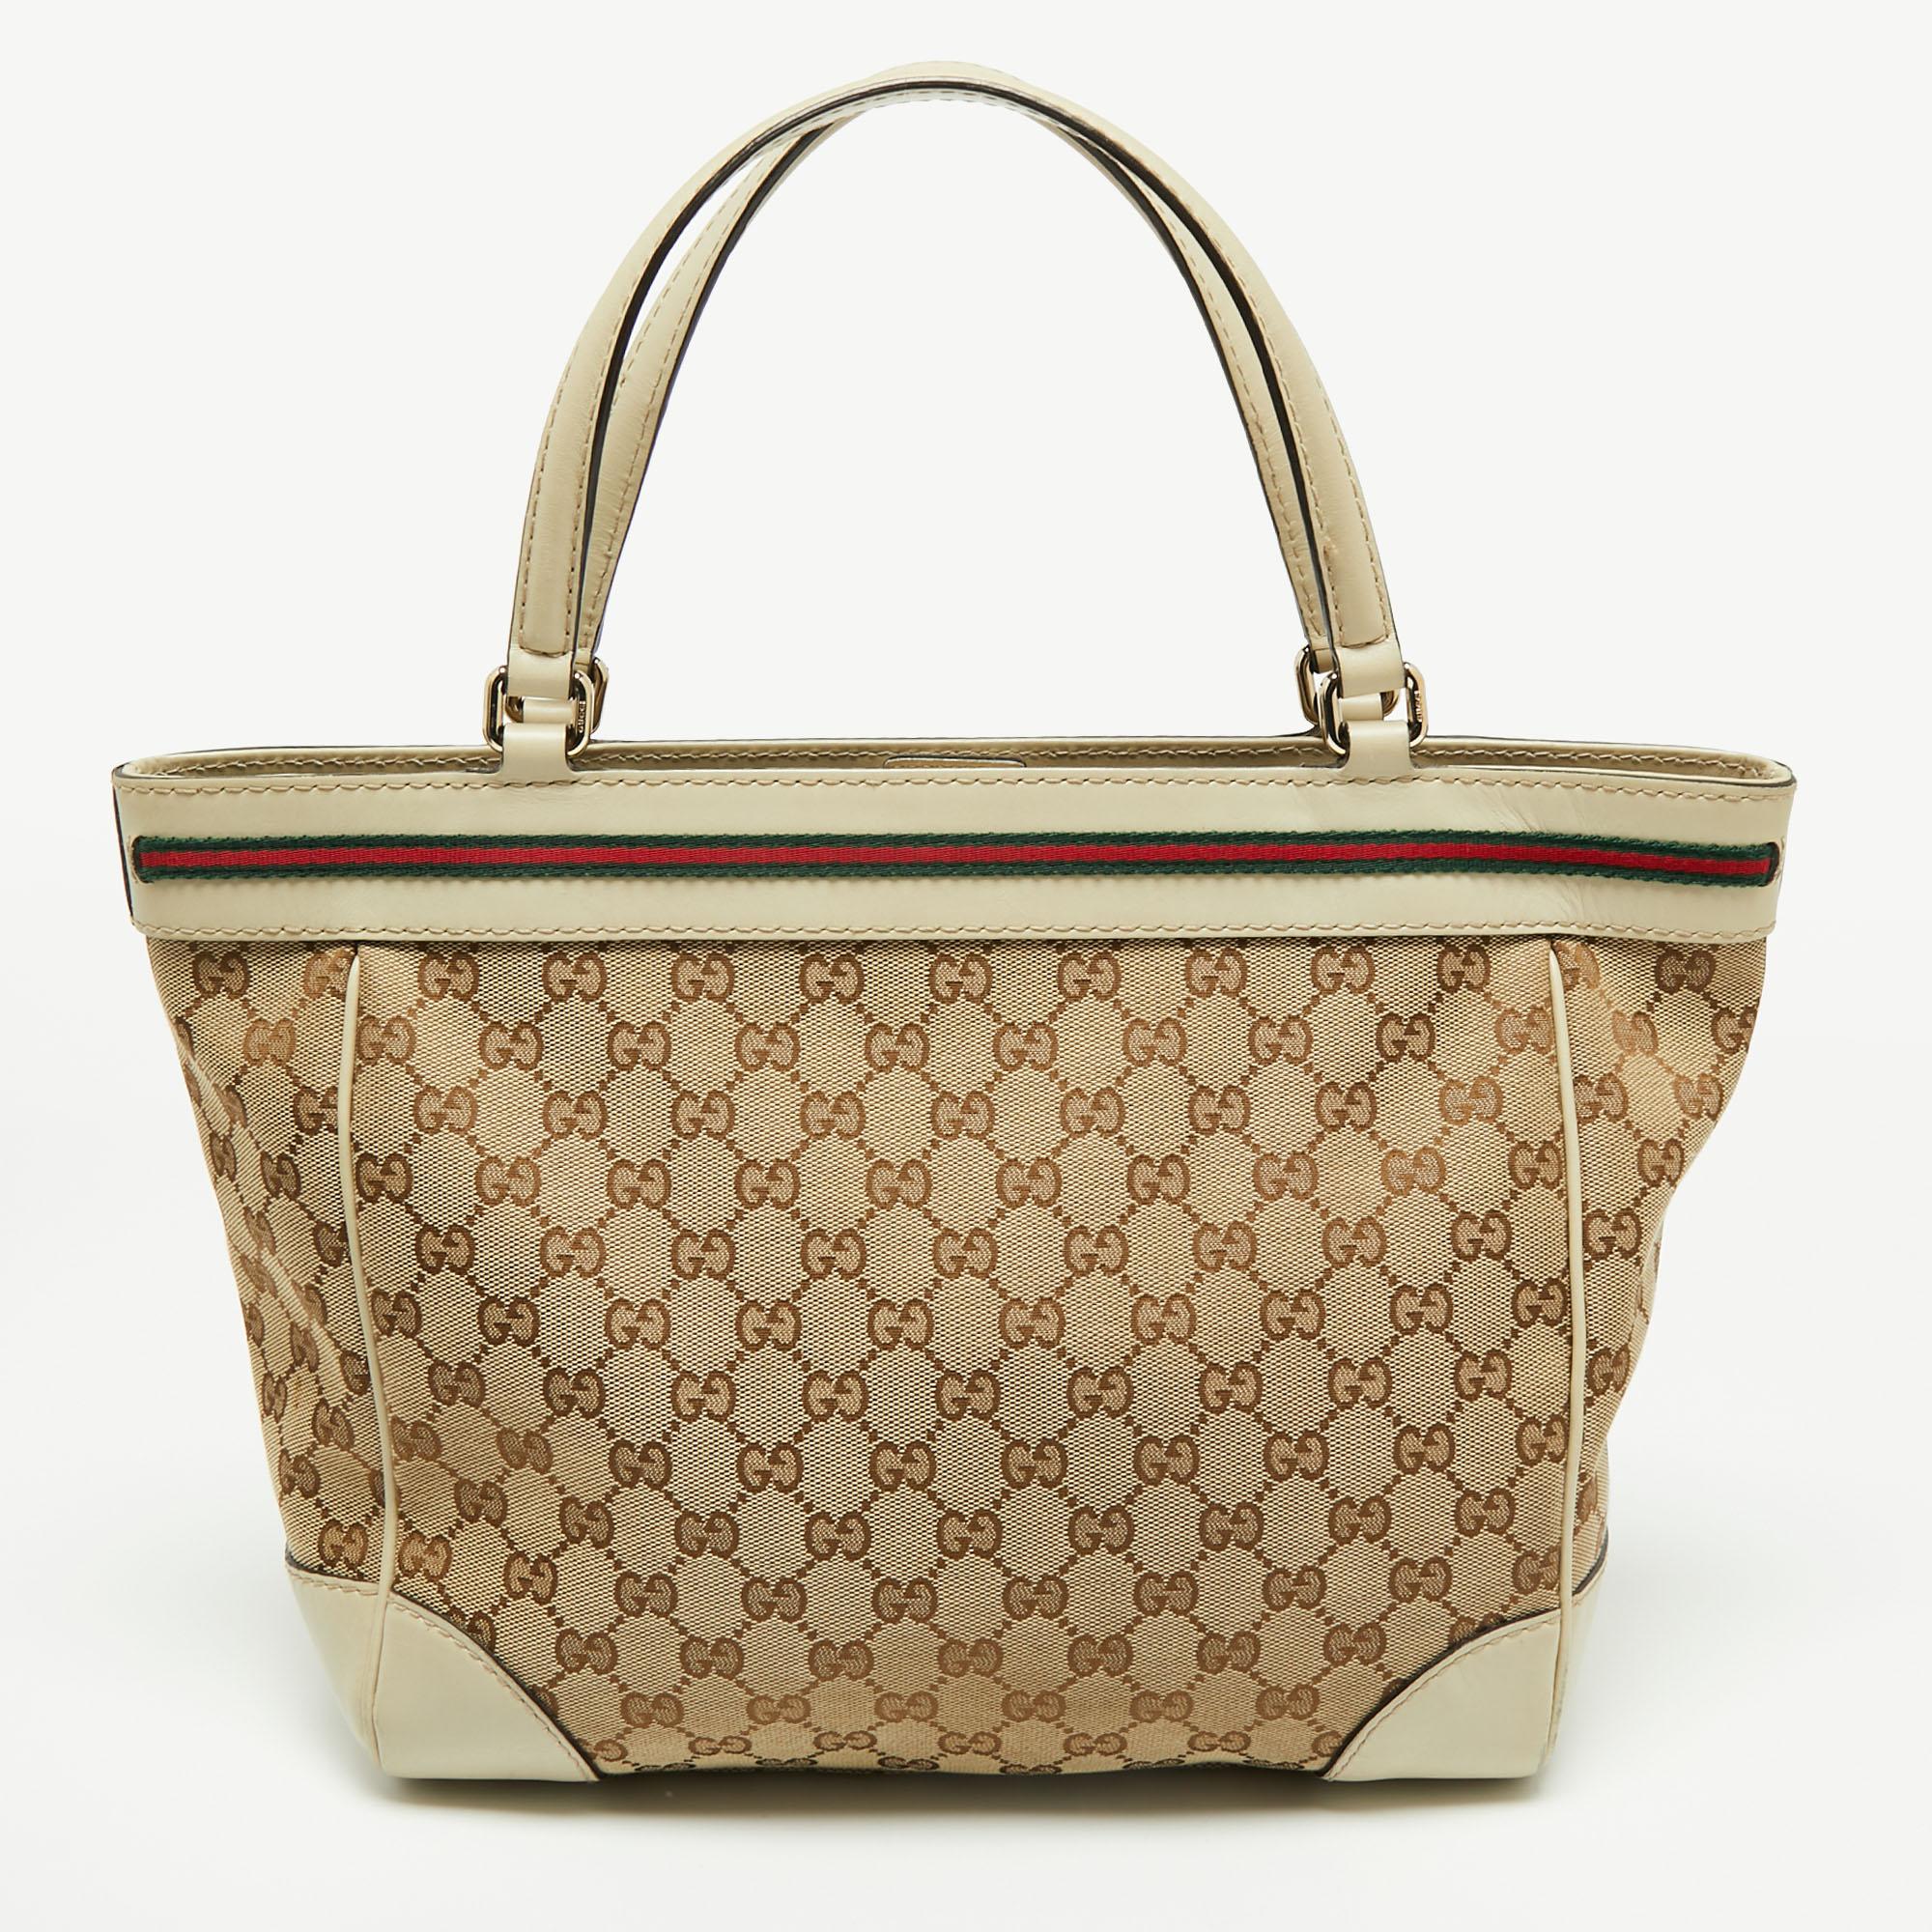 The Mayfair tote from Gucci will lend a stylish appeal to your looks. It comes crafted from the signature GG canvas and leather and features dual top handles. It opens to a fabric-lined interior that is spacious enough to carry your daily